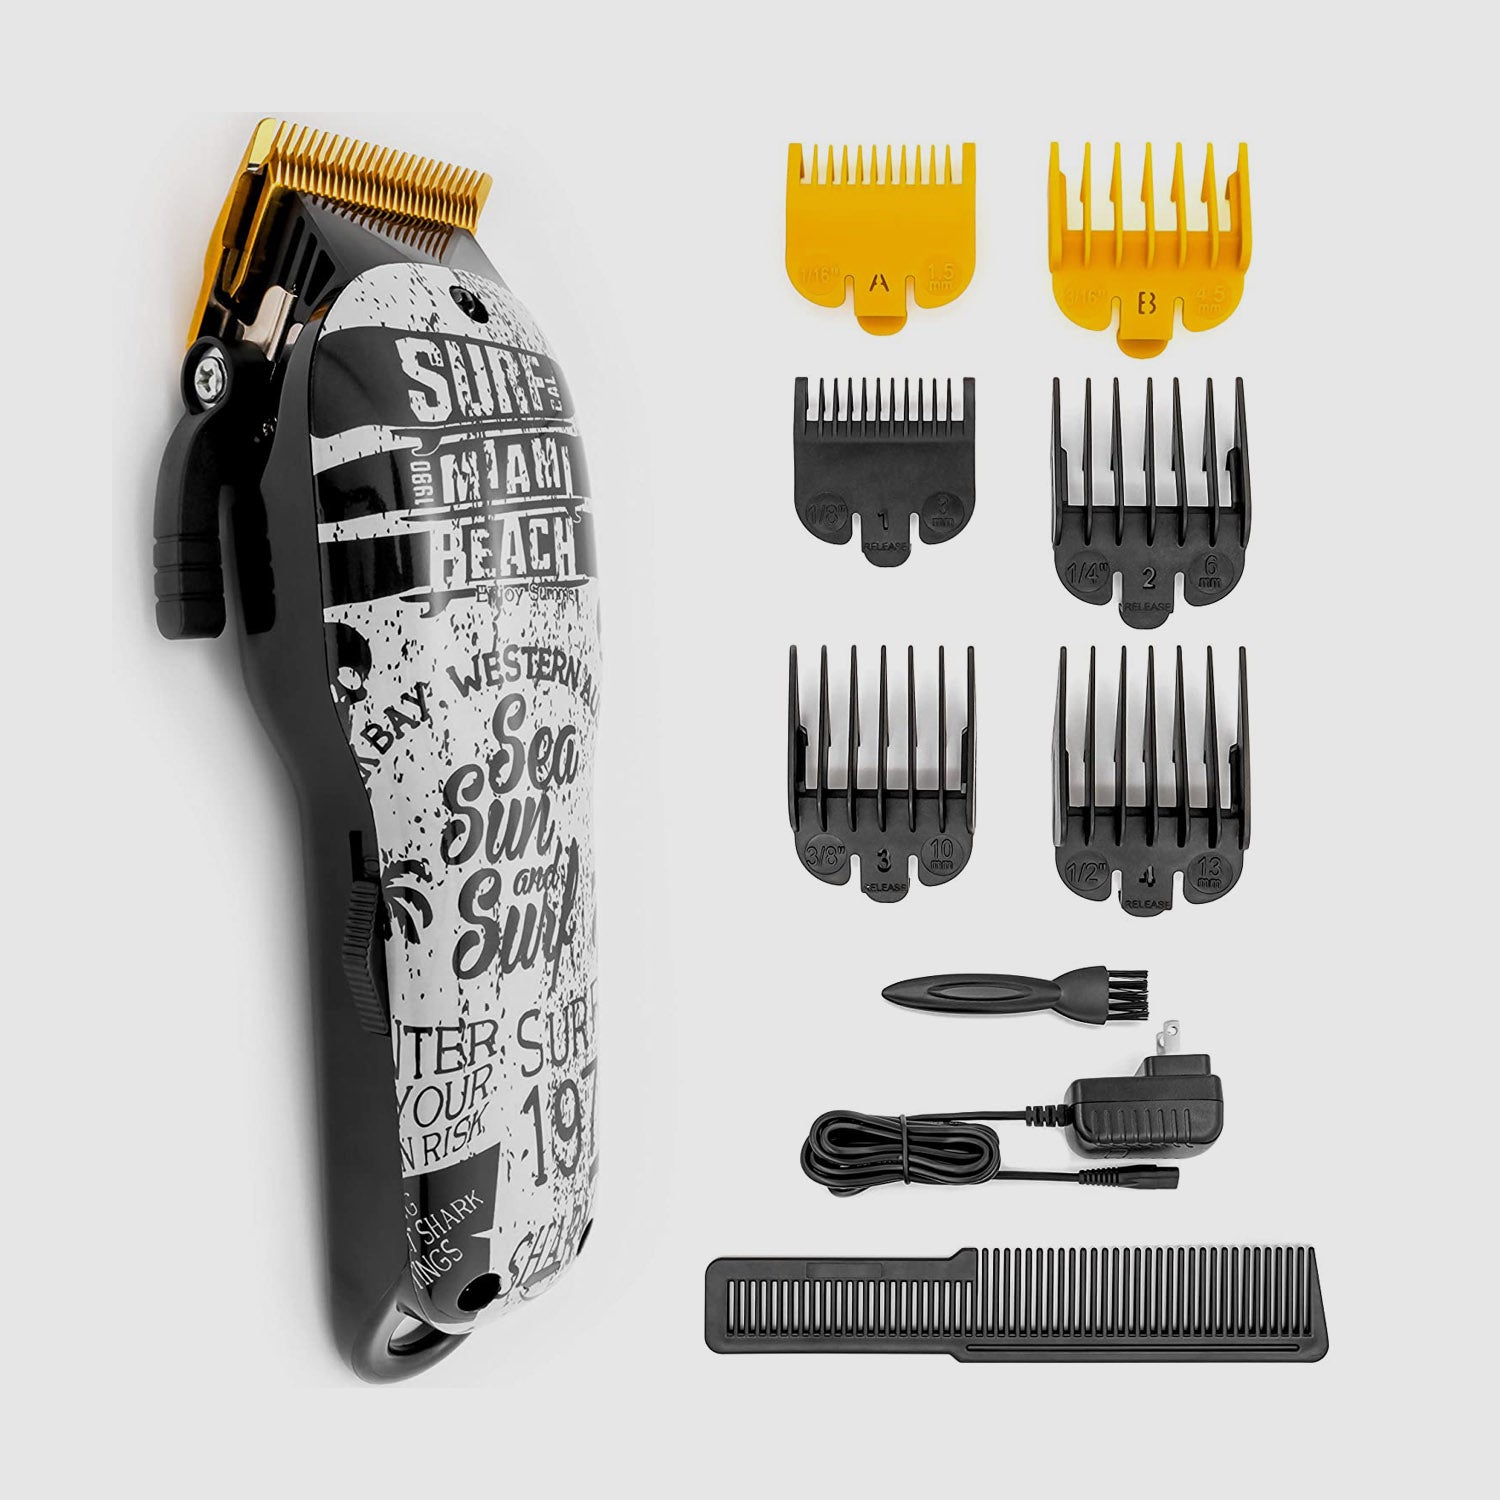 BESTBOMG-4YT-X18 2000mAh Professional Hair Clippers Cutting Kit